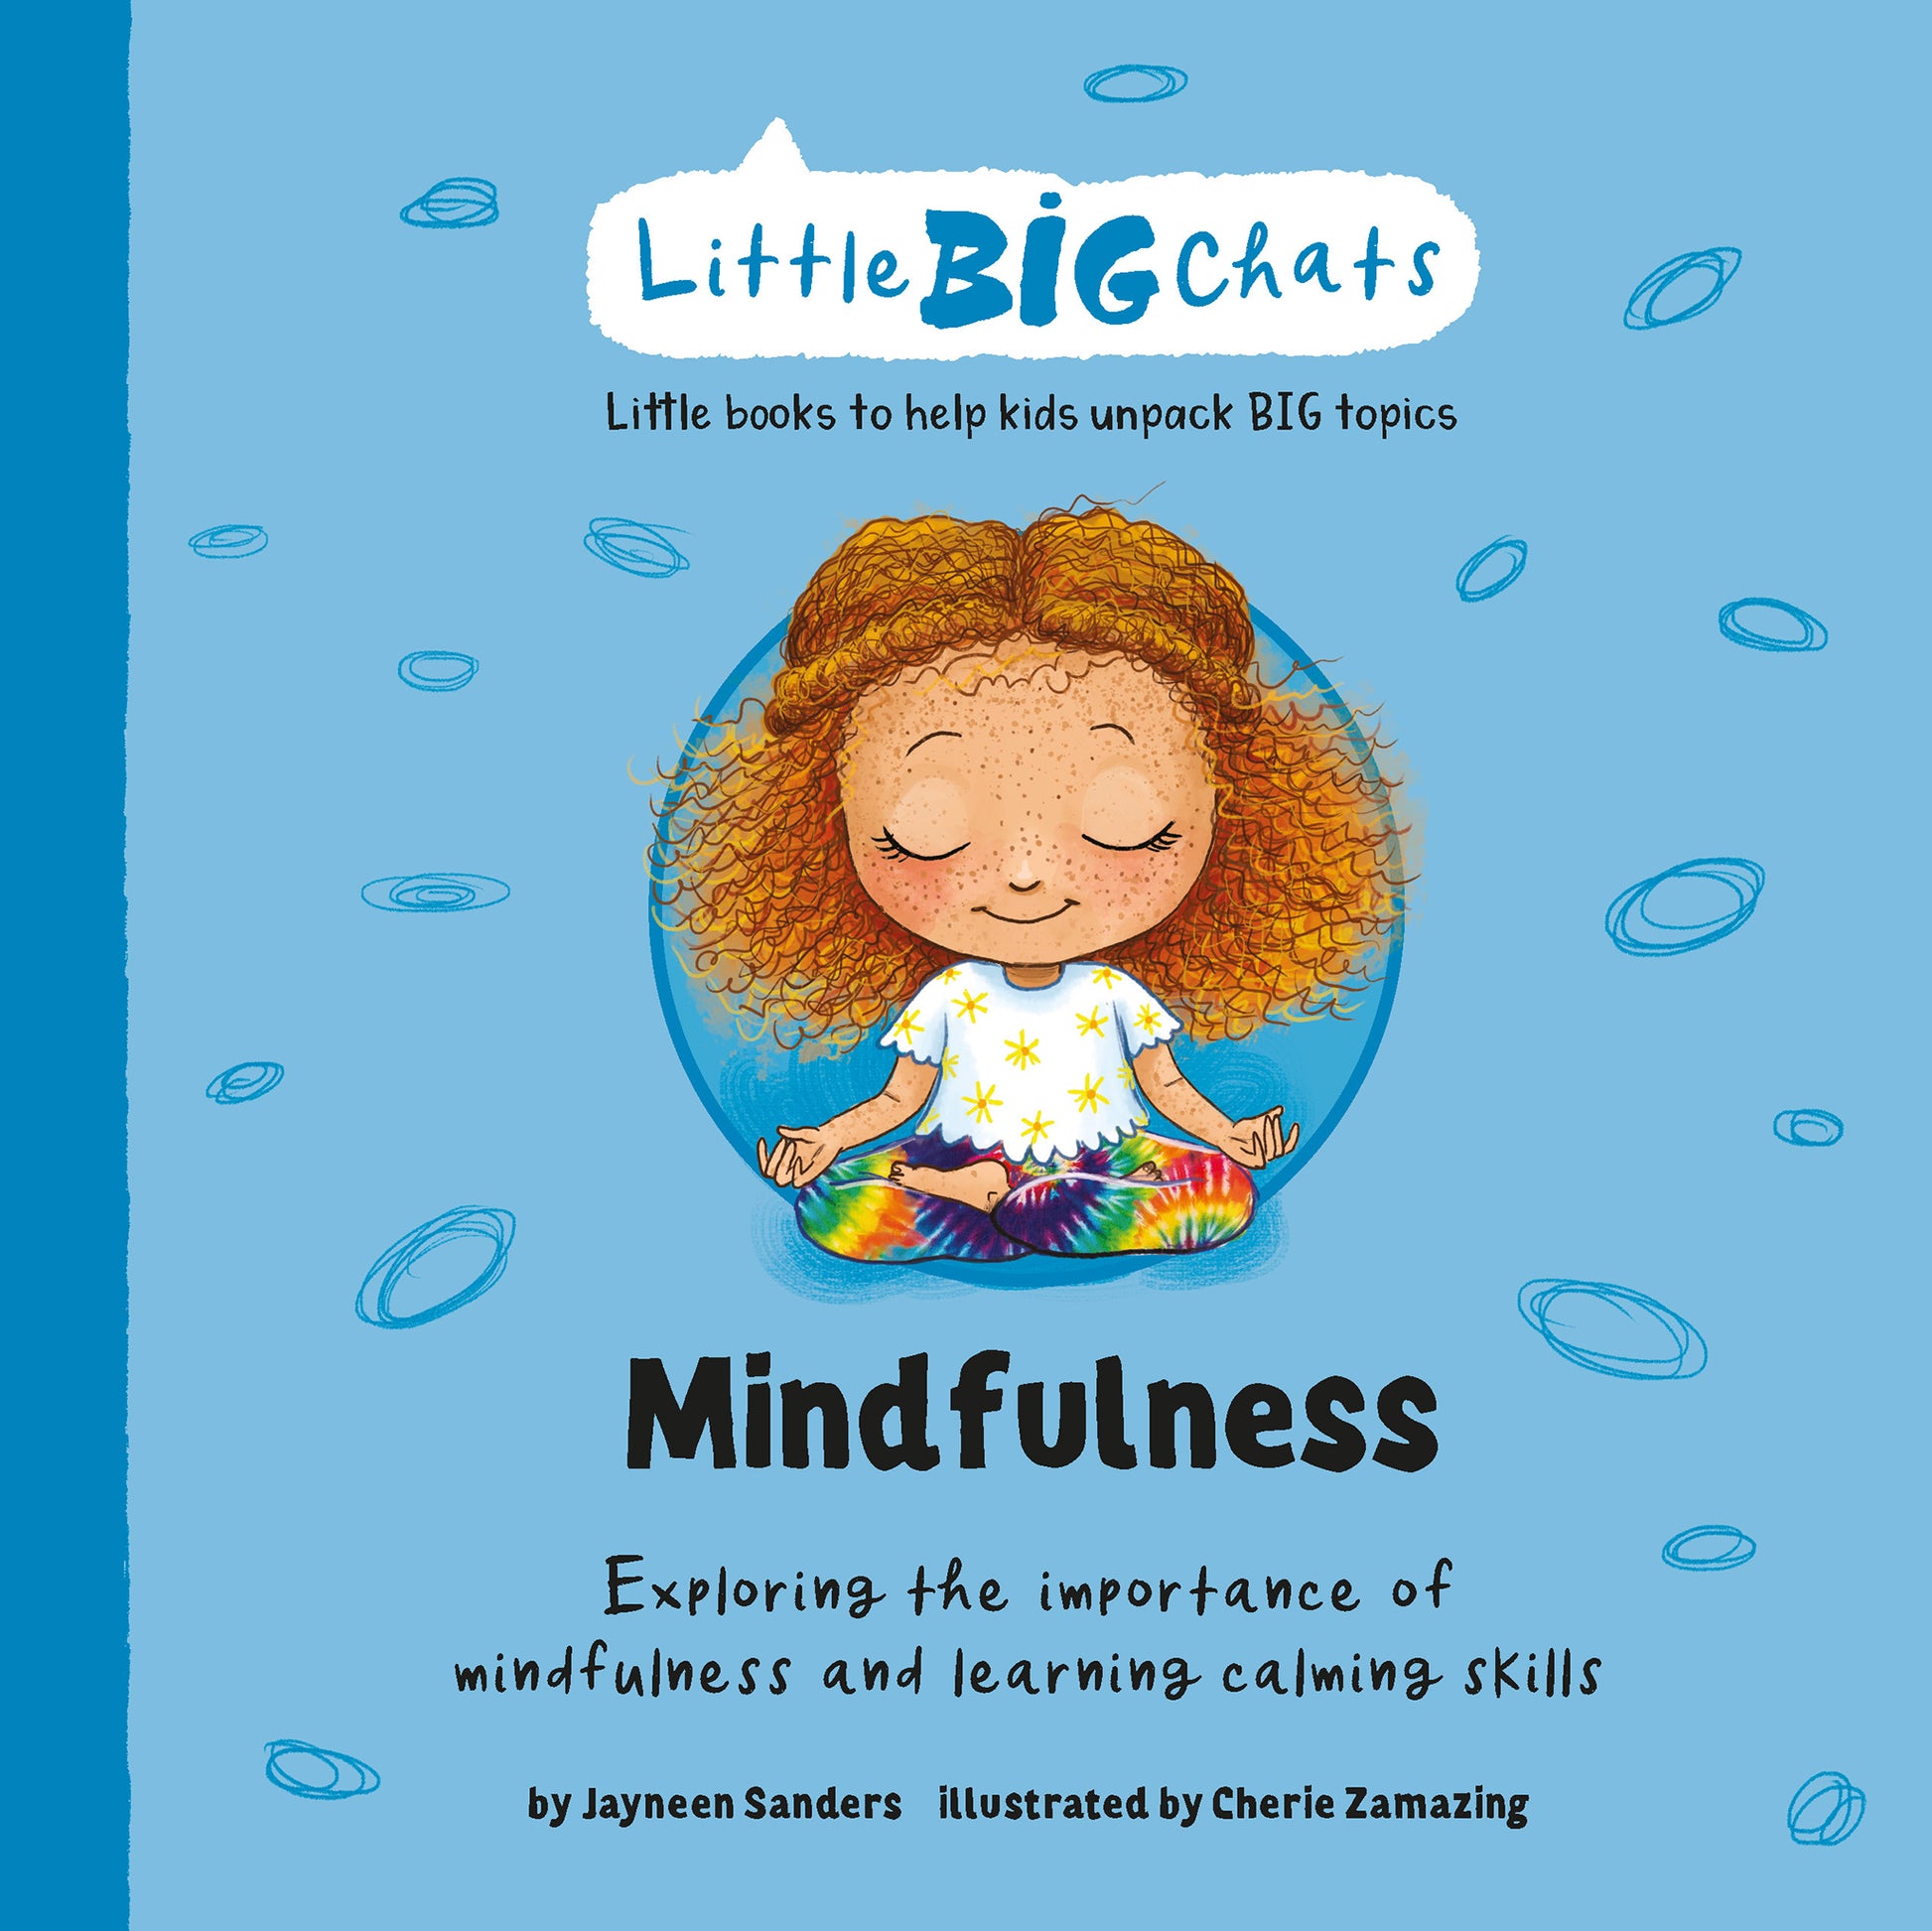 The cover of the Little BIG Chats book ‘Mindfulness’ by Jayneen Sanders.